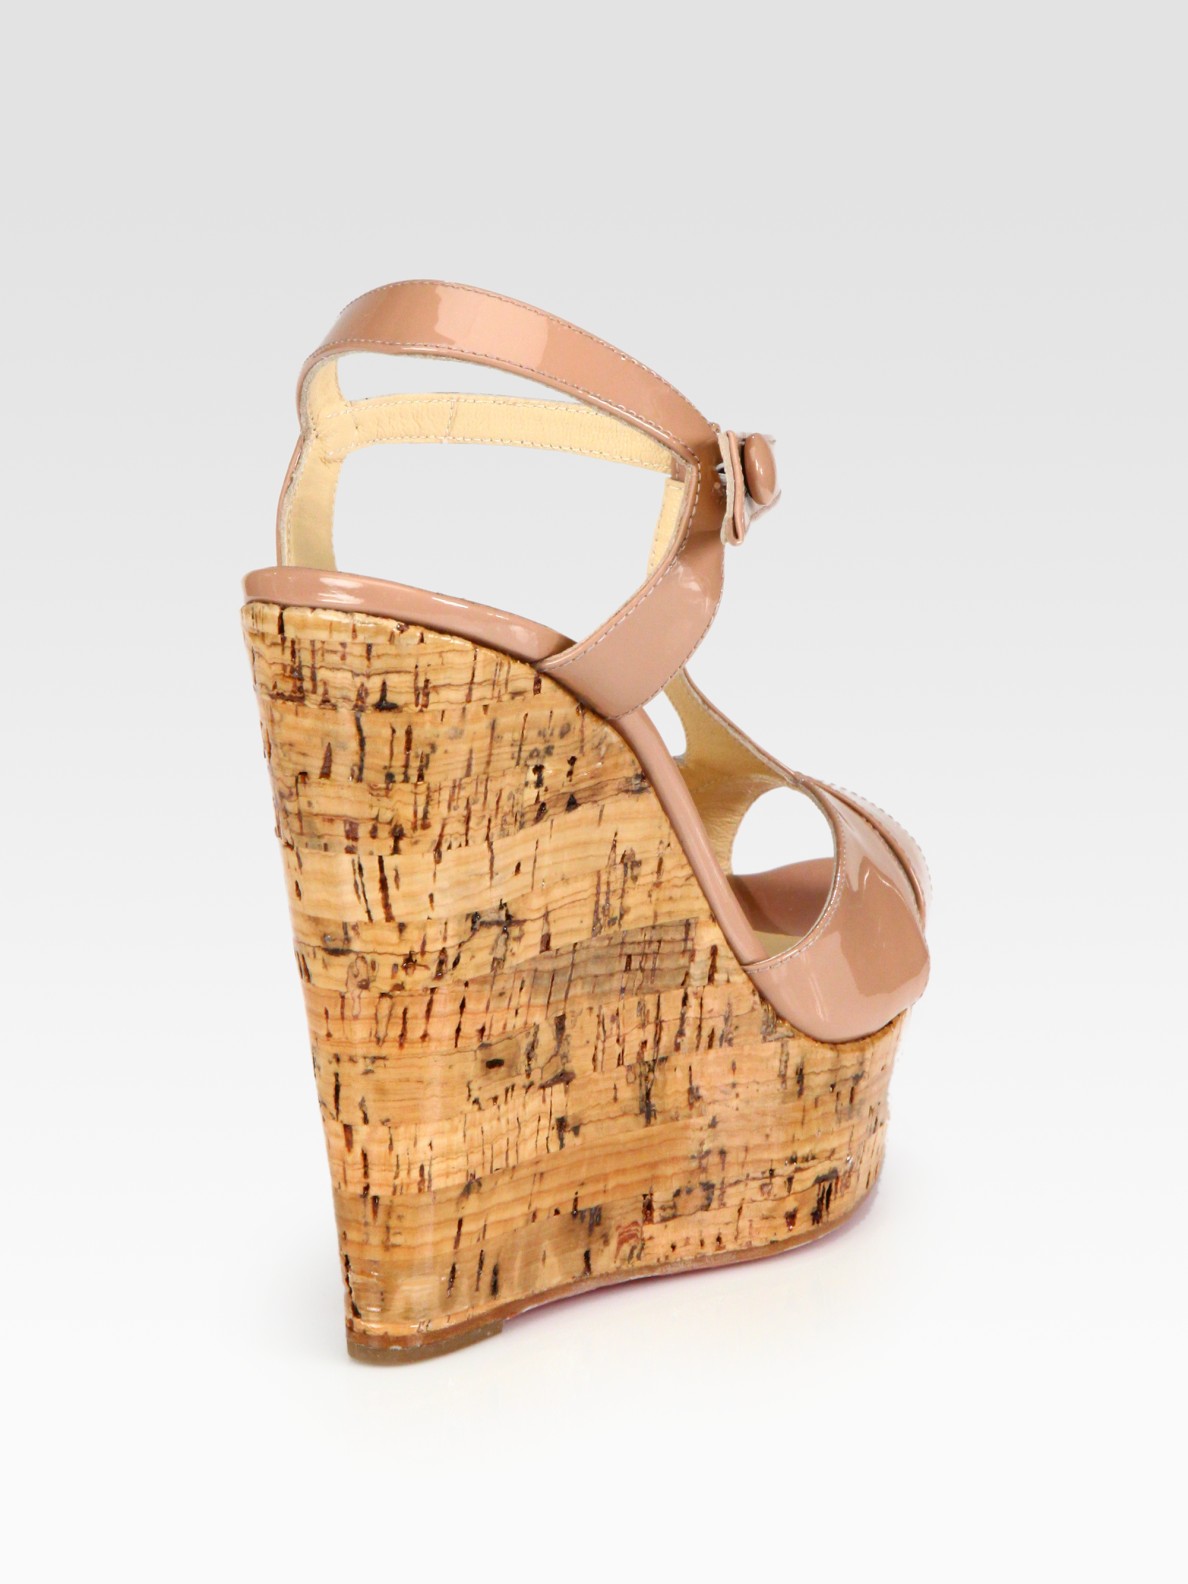 christian louboutin wedges Brown cork slingback straps | The ...